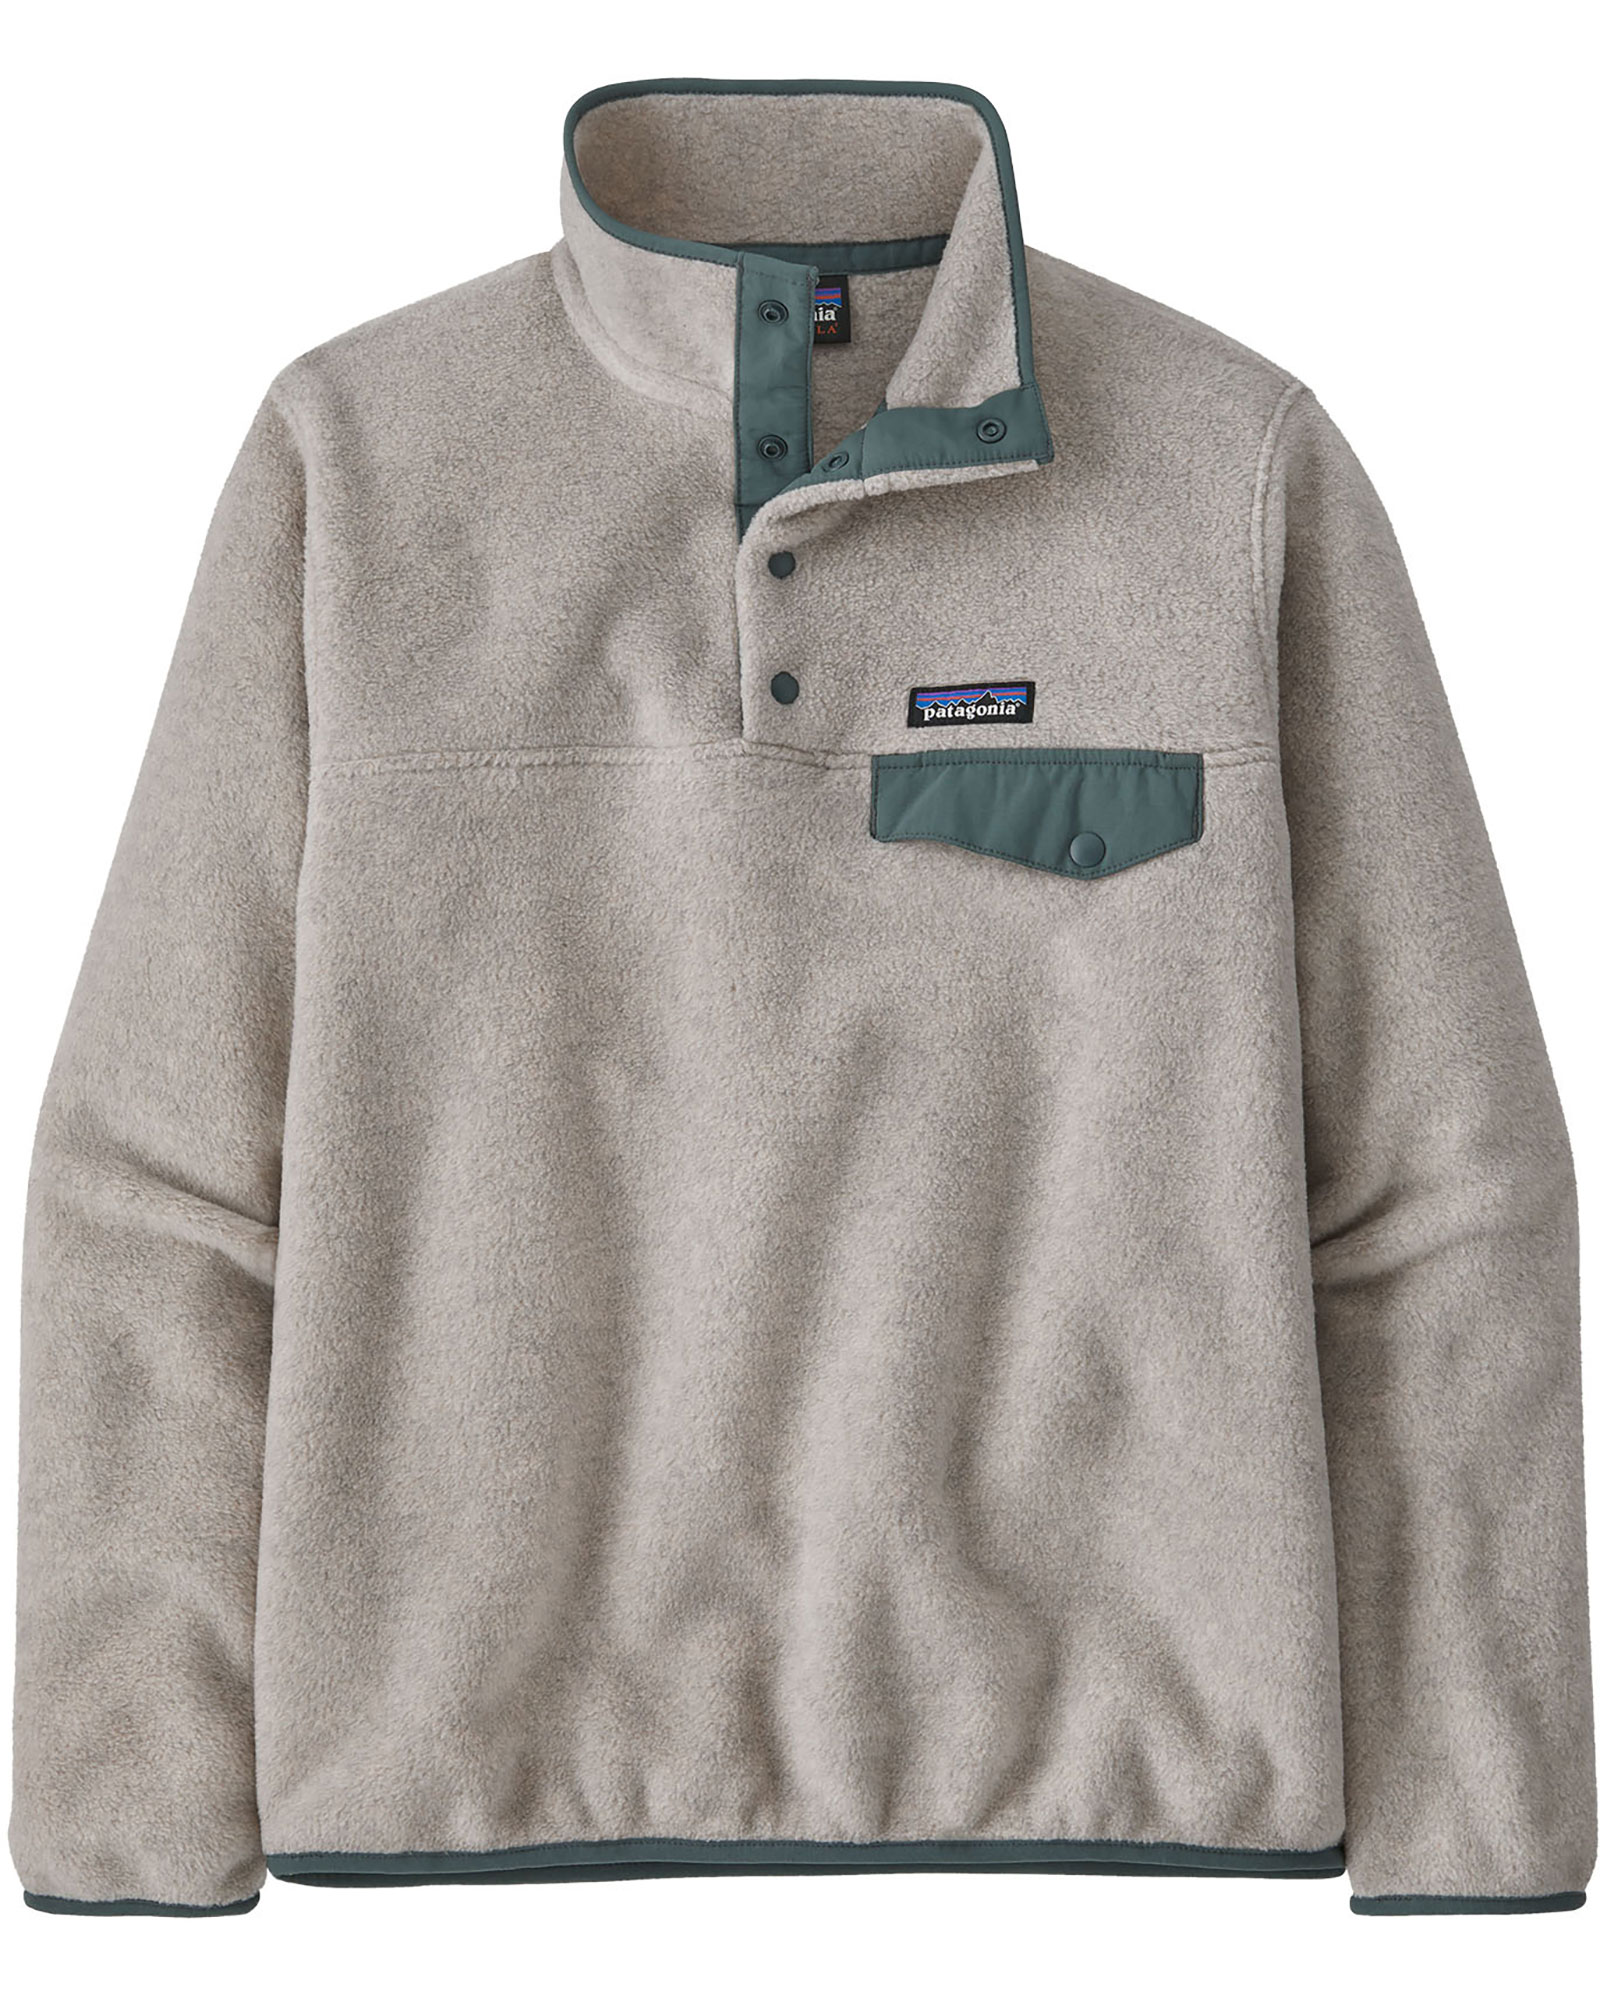 Patagonia Lwt Synchilla Women’s Snap T Pullover - Oatmeal Heather w/Nouveau Green M